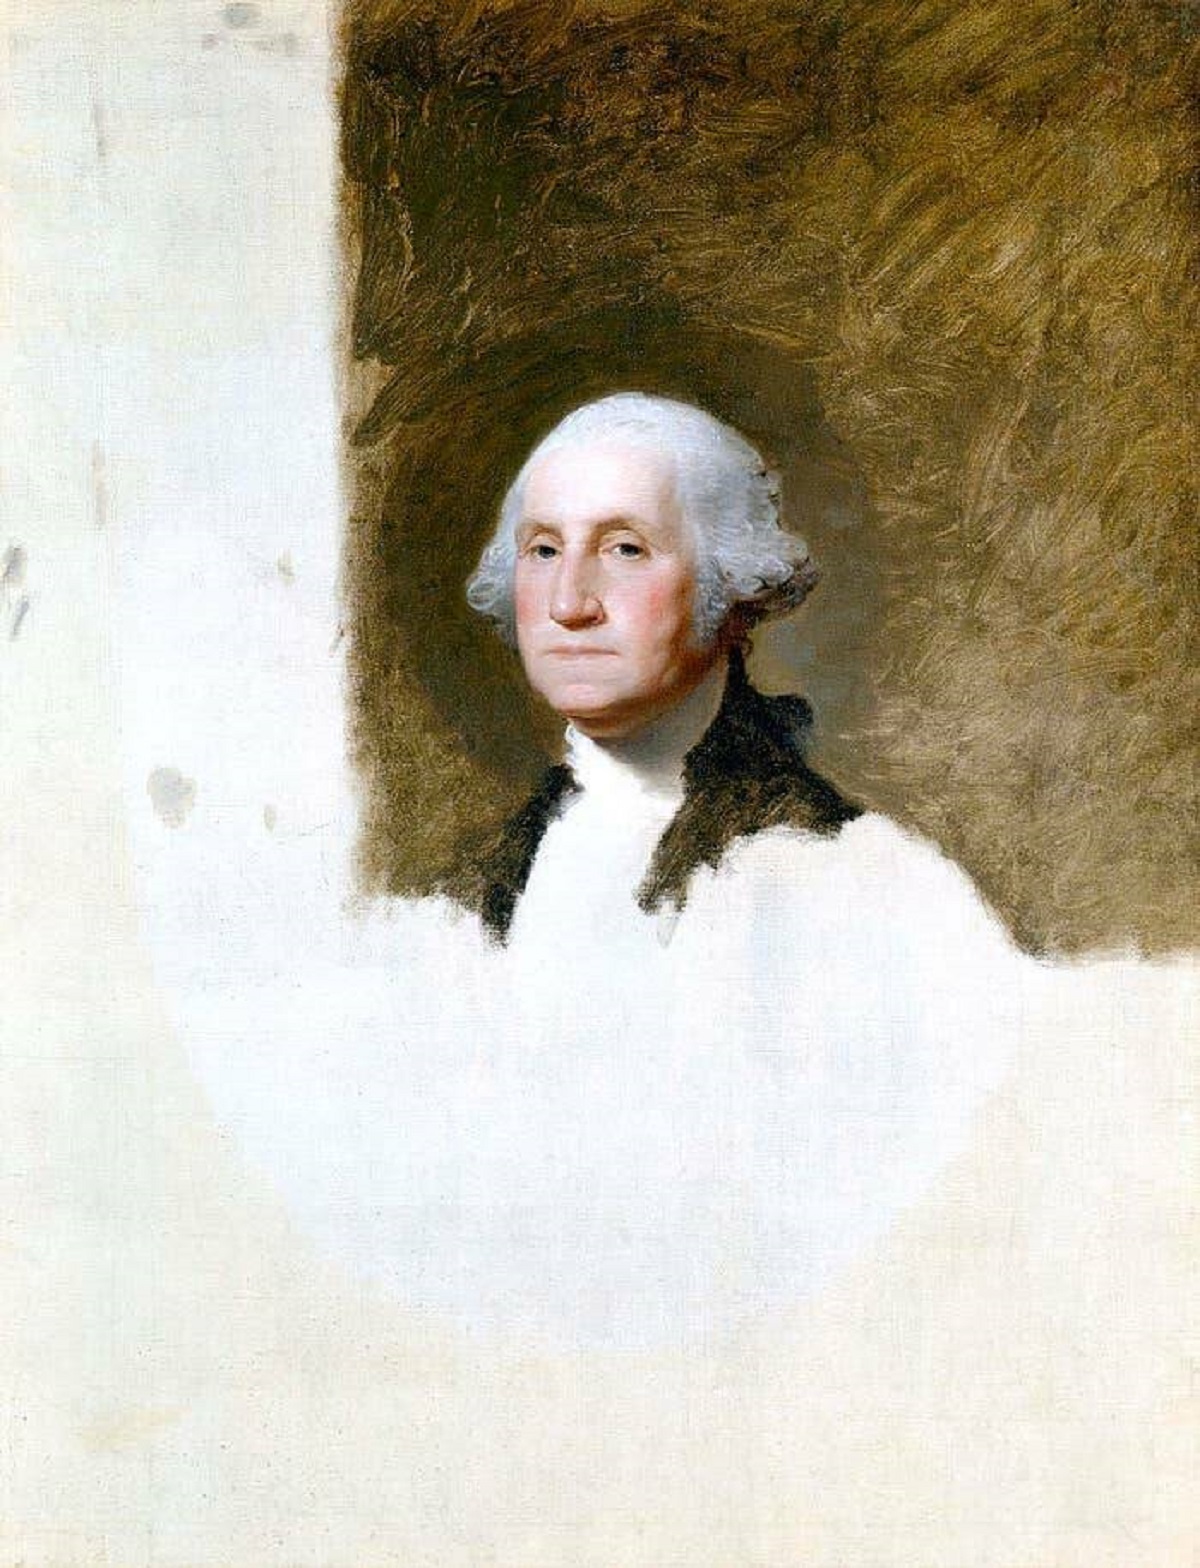 This is the unfinished portrait of George Washington that was used as a basis for the design of the $1 bill: